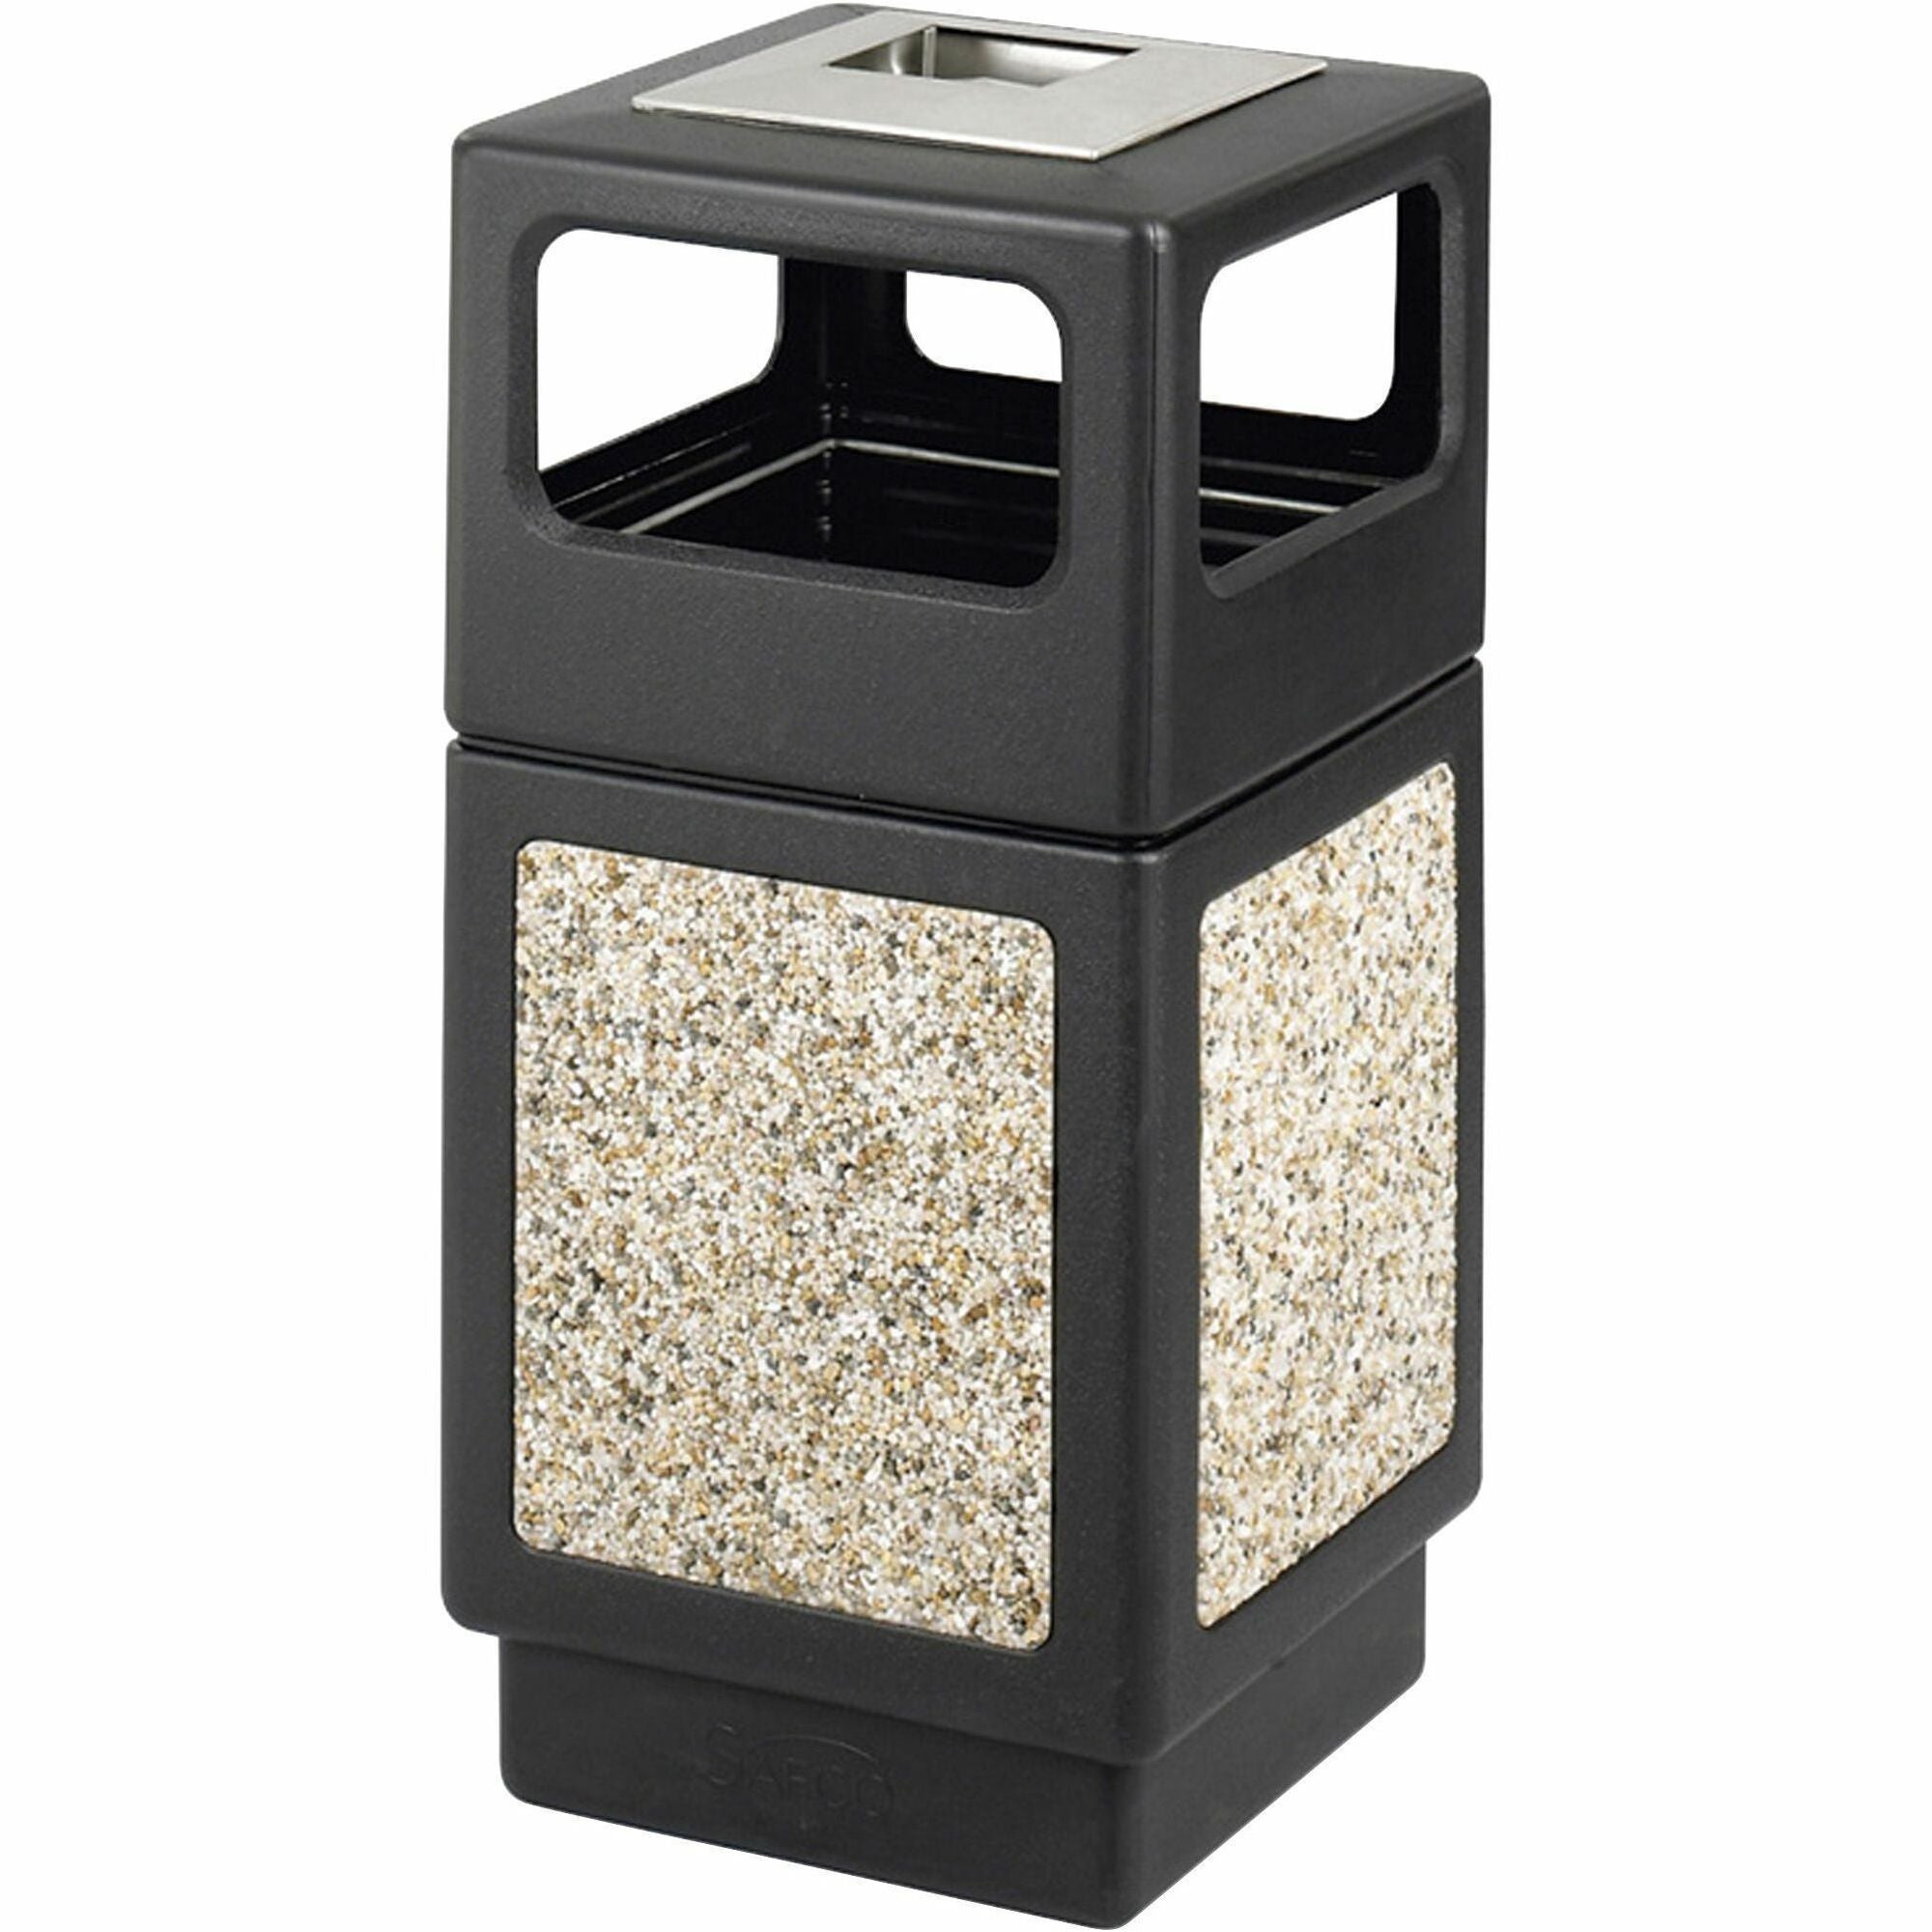 Safco Plastic/Stone Aggregate Receptacles - 38 gal Capacity - Square - 39.3" Height x 18.3" Width x 18.3" Depth - Polyethylene, Stainless Steel - Black - 1 Each - 